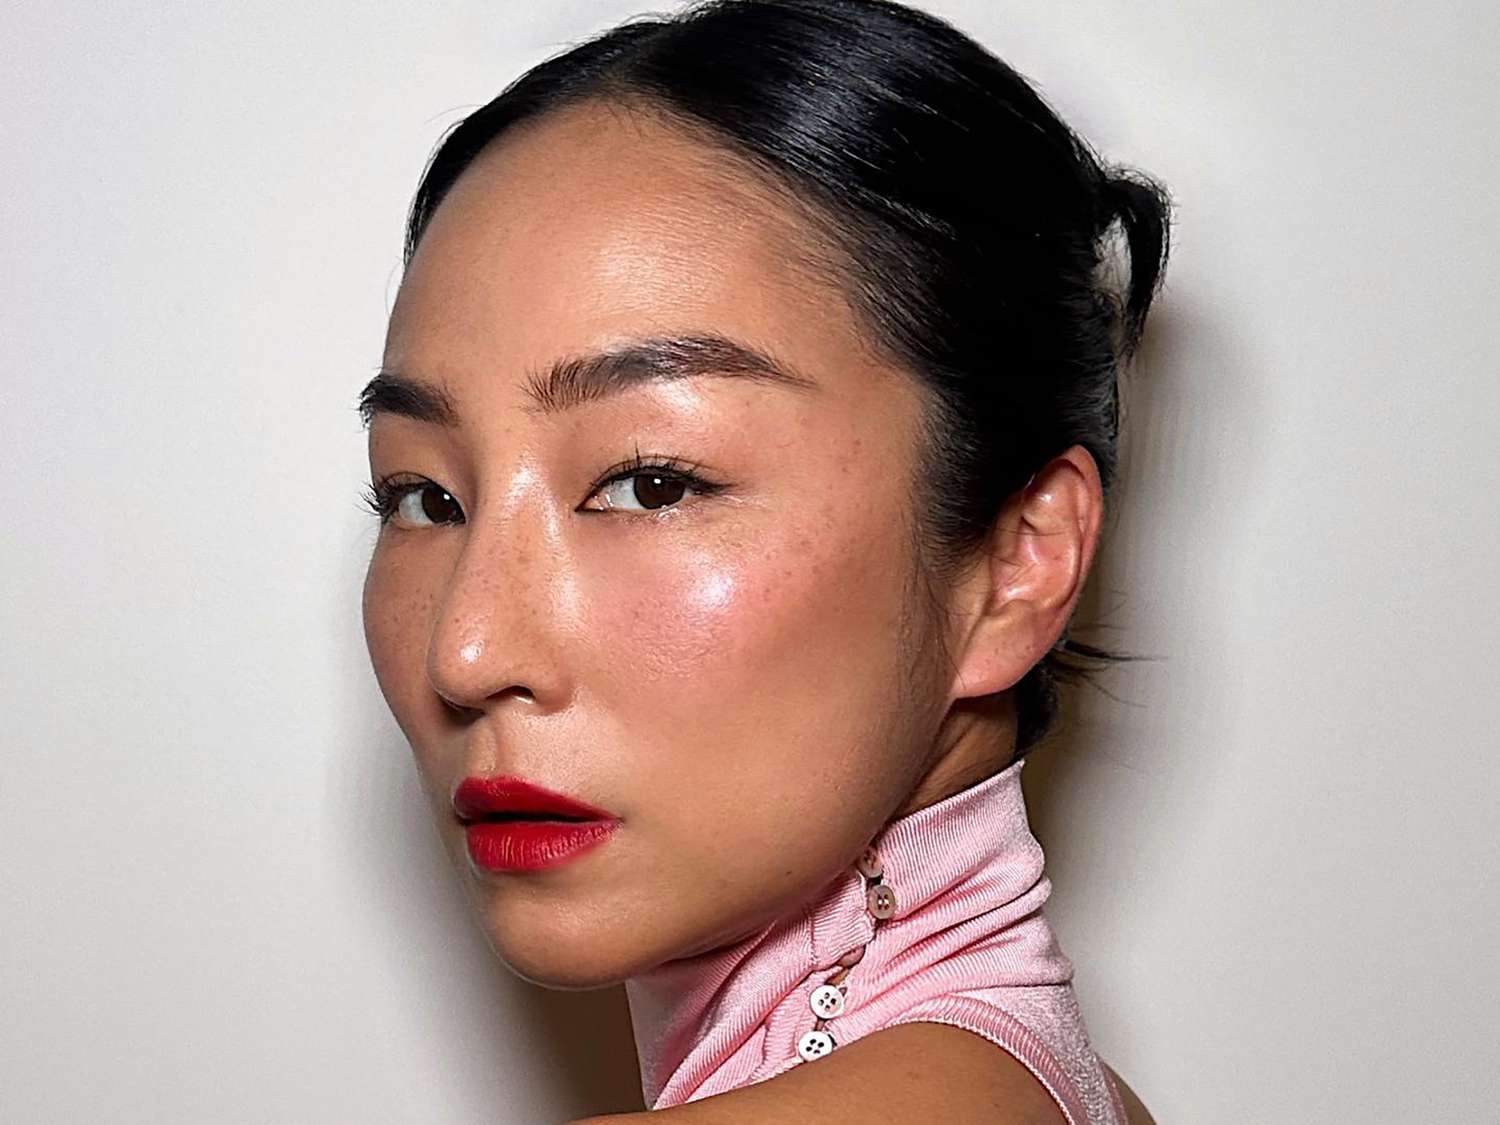 Actor Greta Lee with glowy, perfectly applied makeup